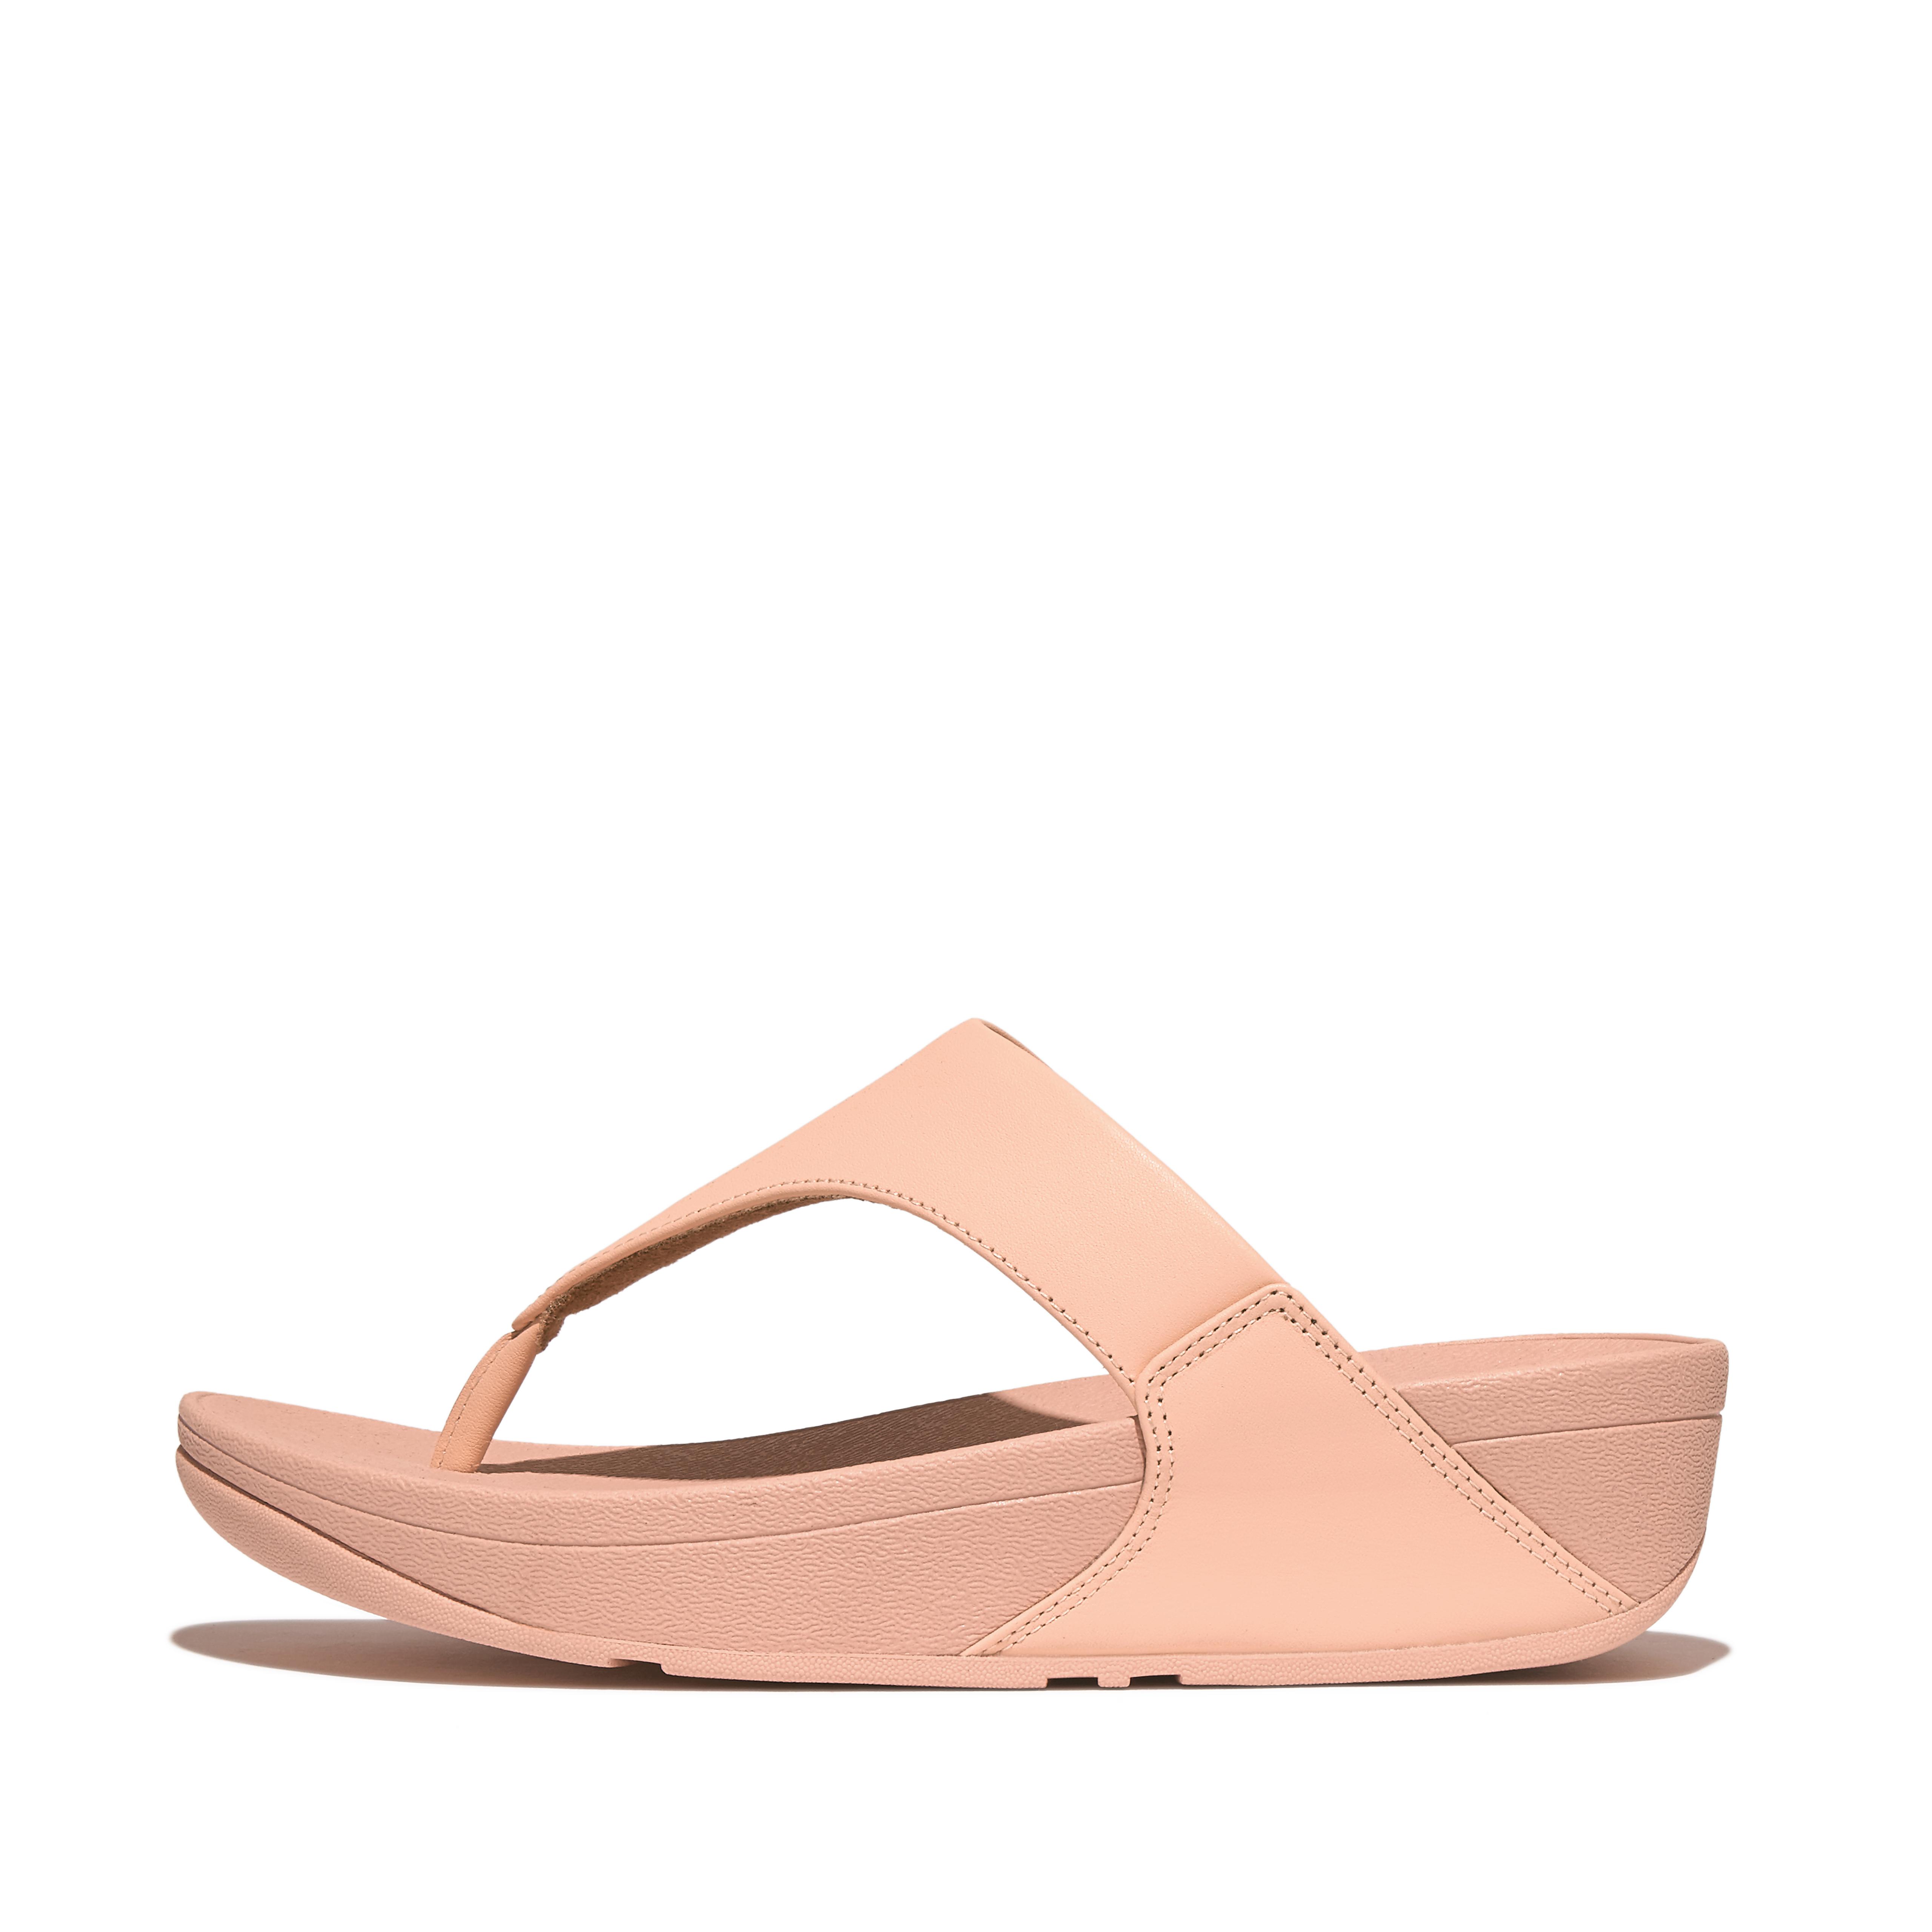 Fitflop Leather Toe-Post Sandals,Blushy